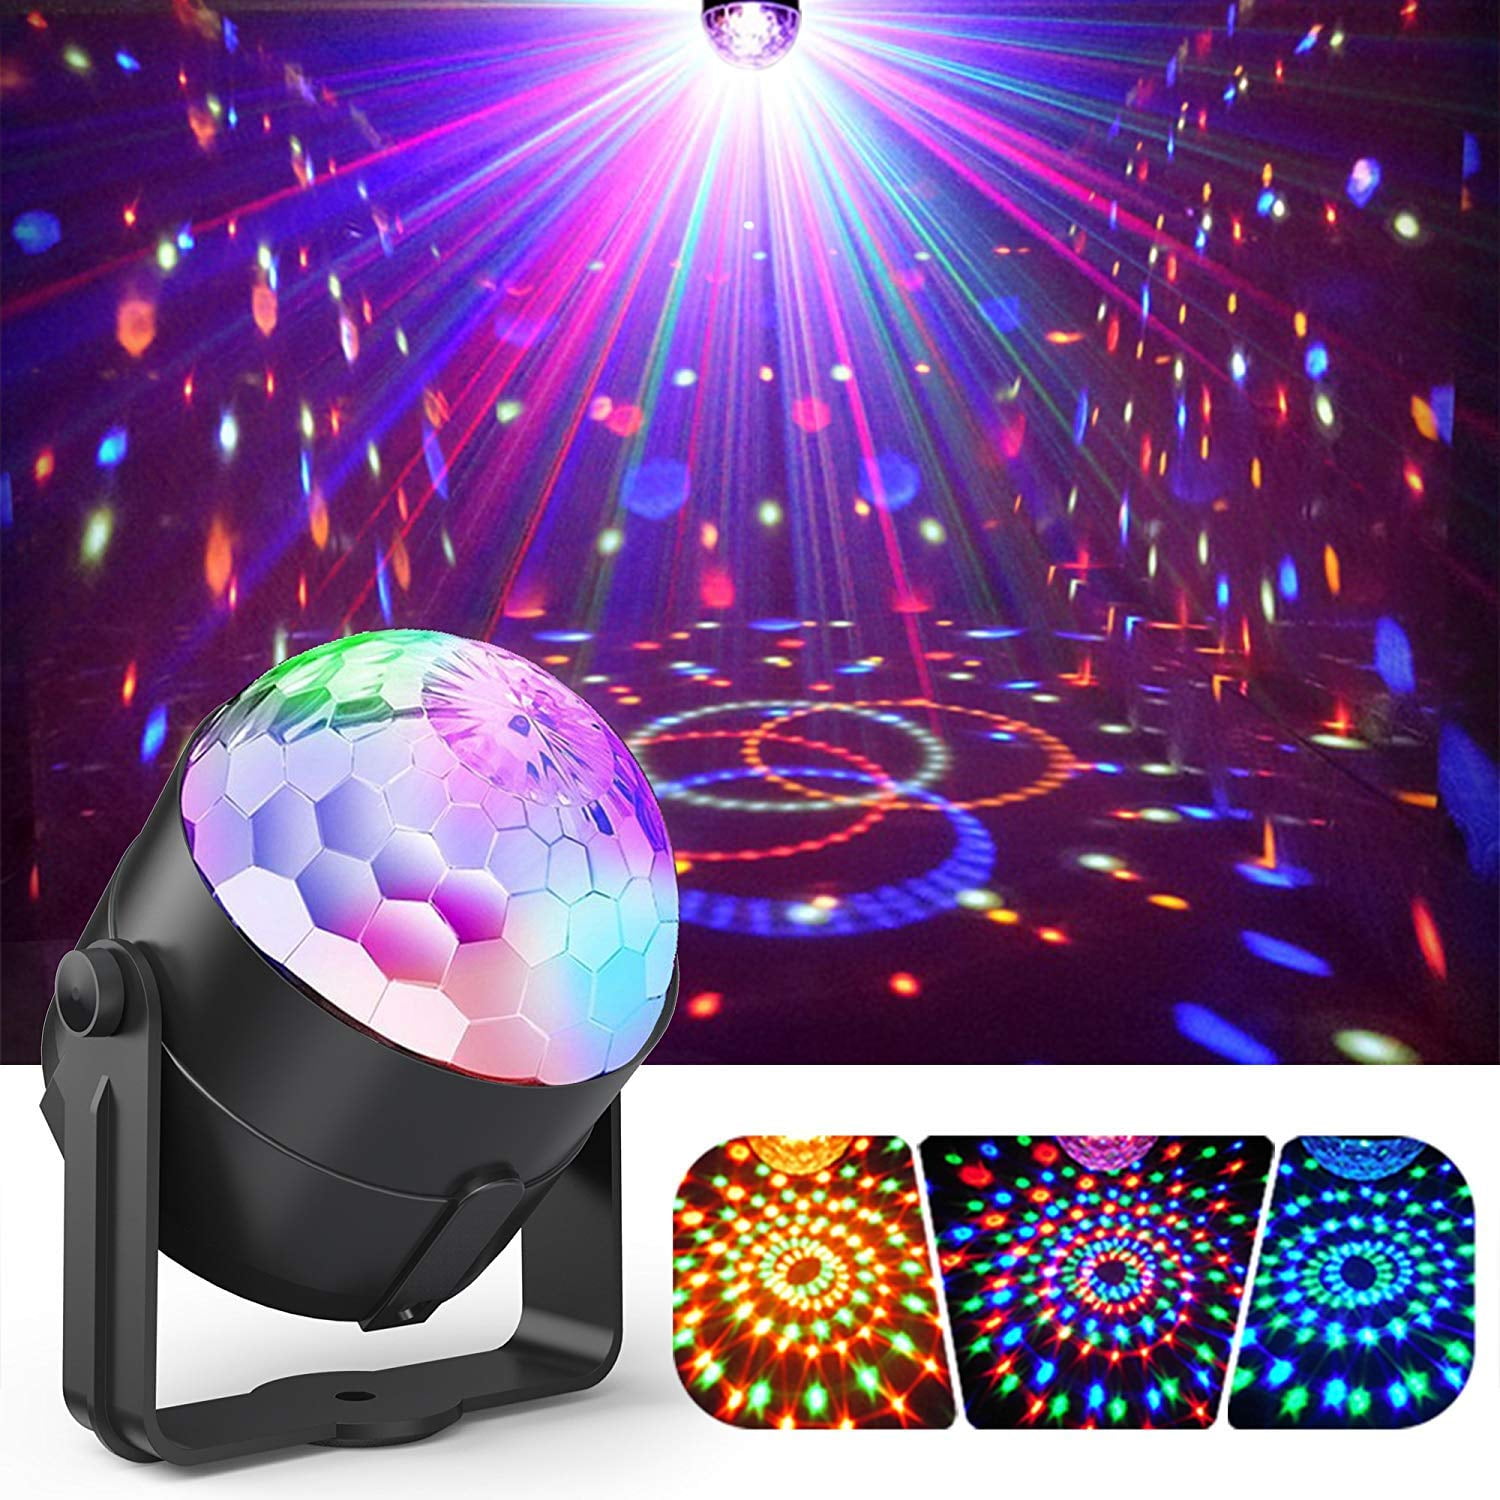 ROTATING DISCO BALL LIGTHING STAGE DANCE PARTY NIGHT FLASHING MULTI COLOUR LIGHT 